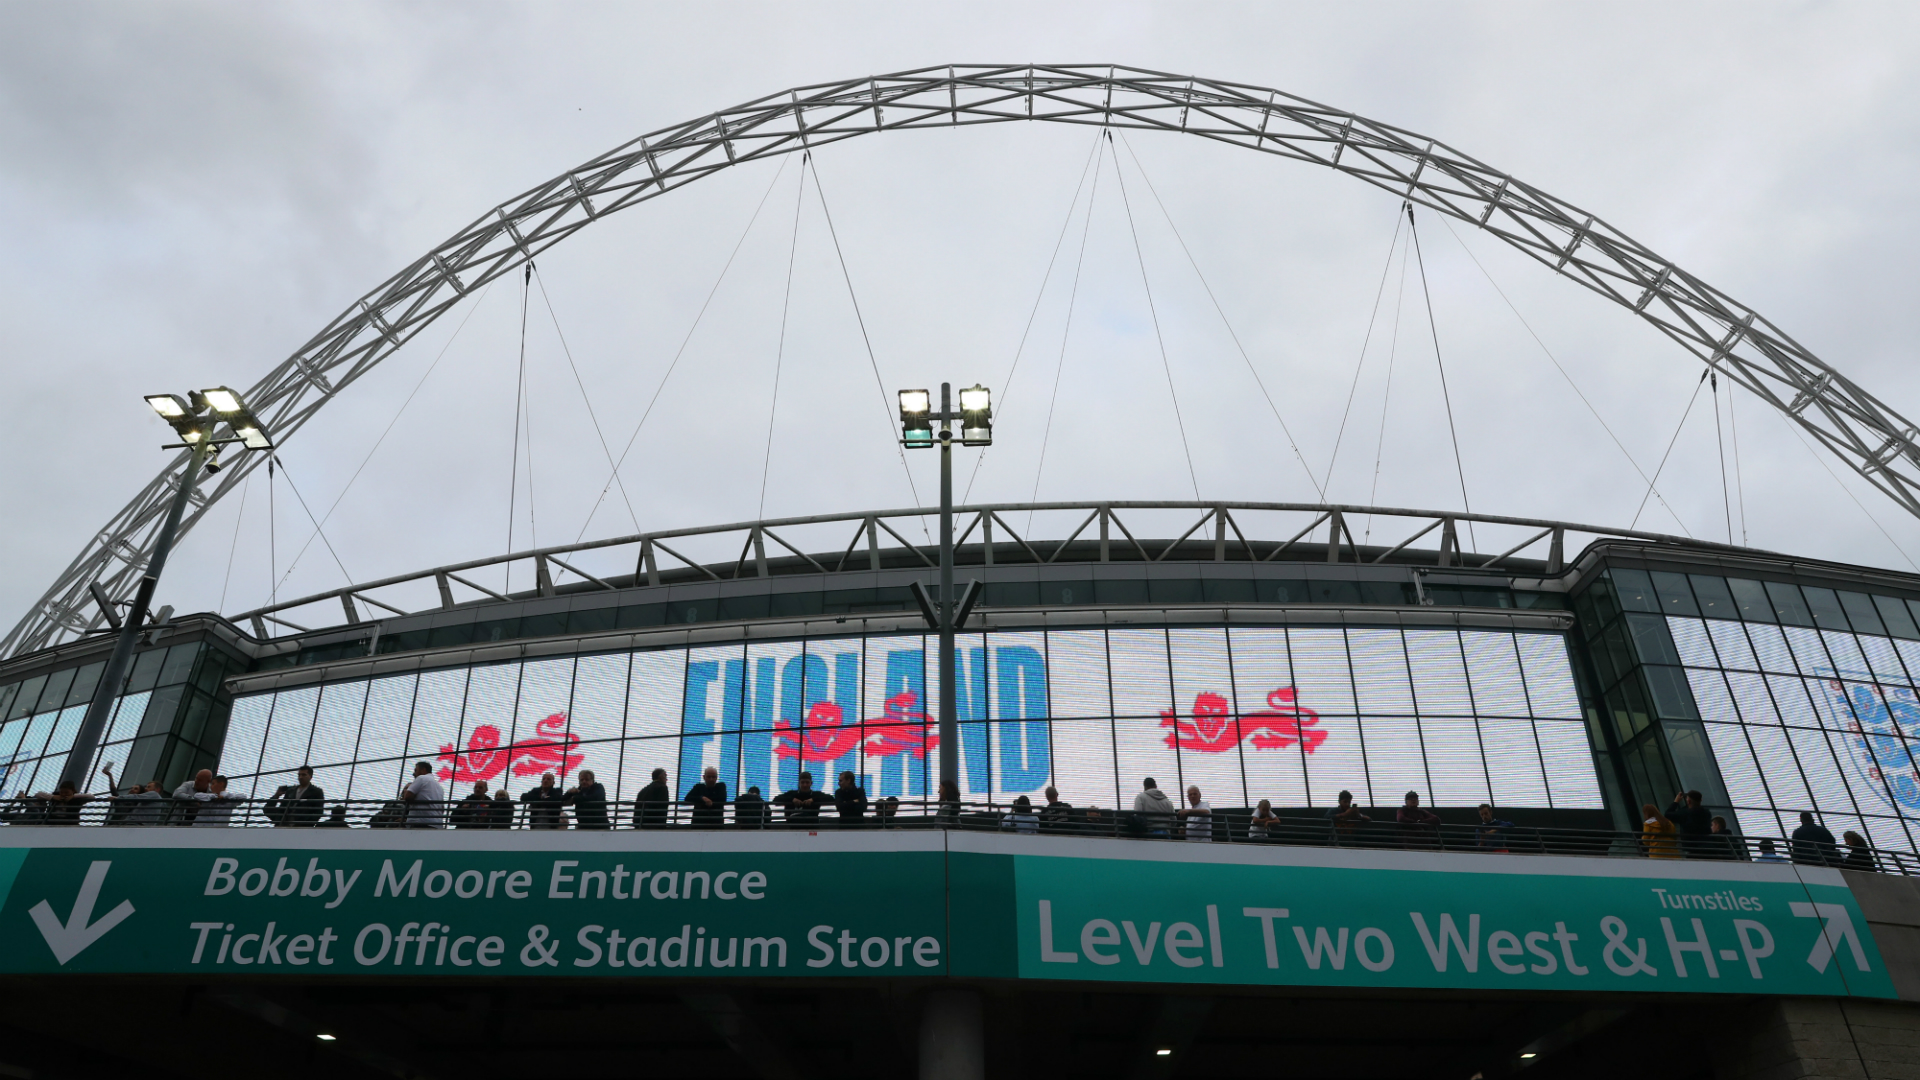 A vote on whether to sell Wembley Stadium to Fulham and Jacksonville Jaguars owner Shahid Khan will take place later this month.